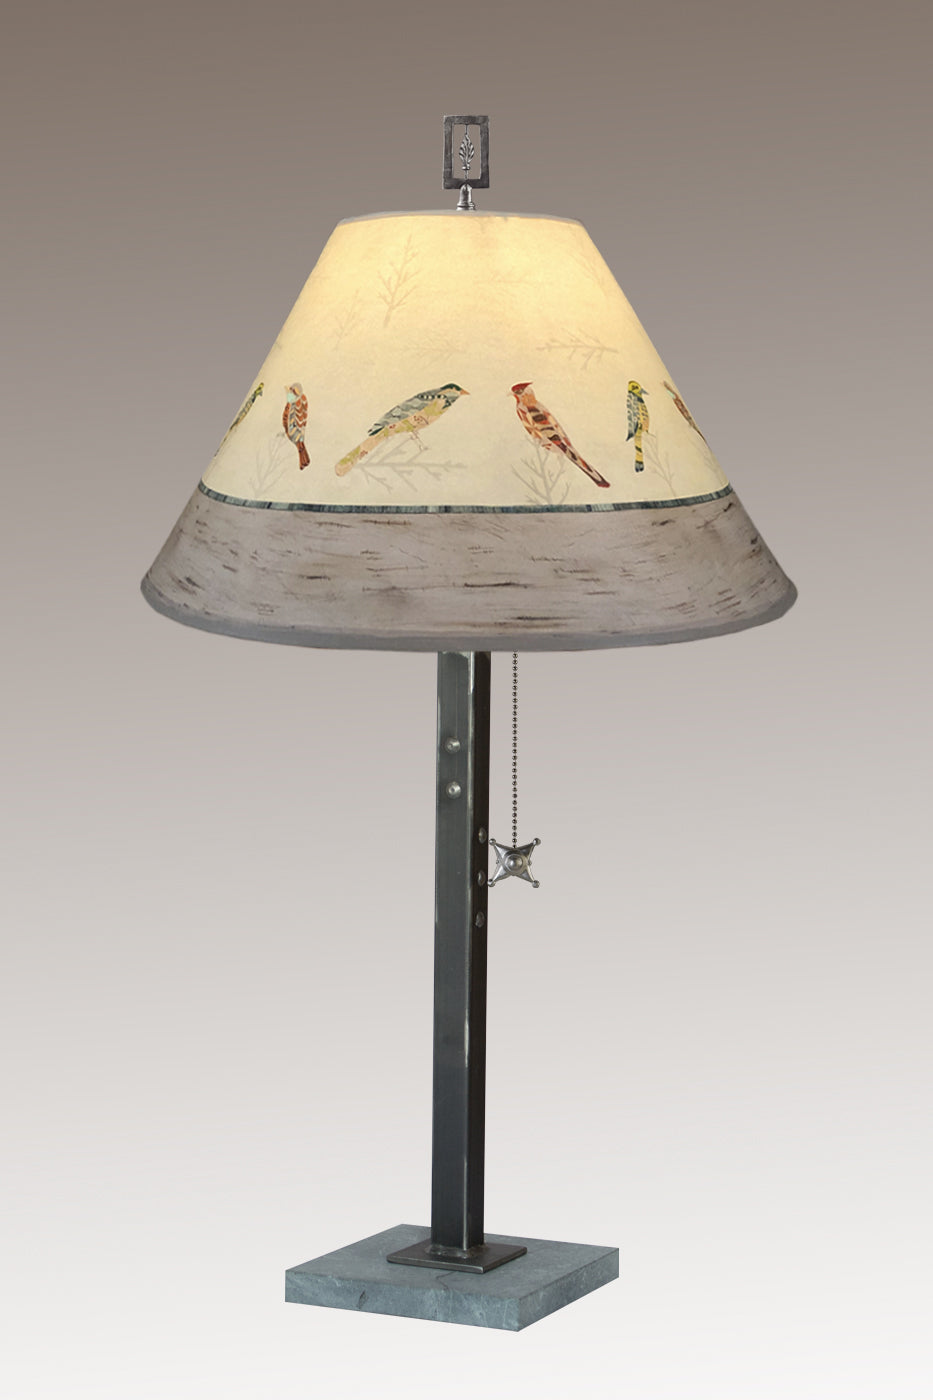 Steel Table Lamp with Medium Conical Shade in Bird Friends